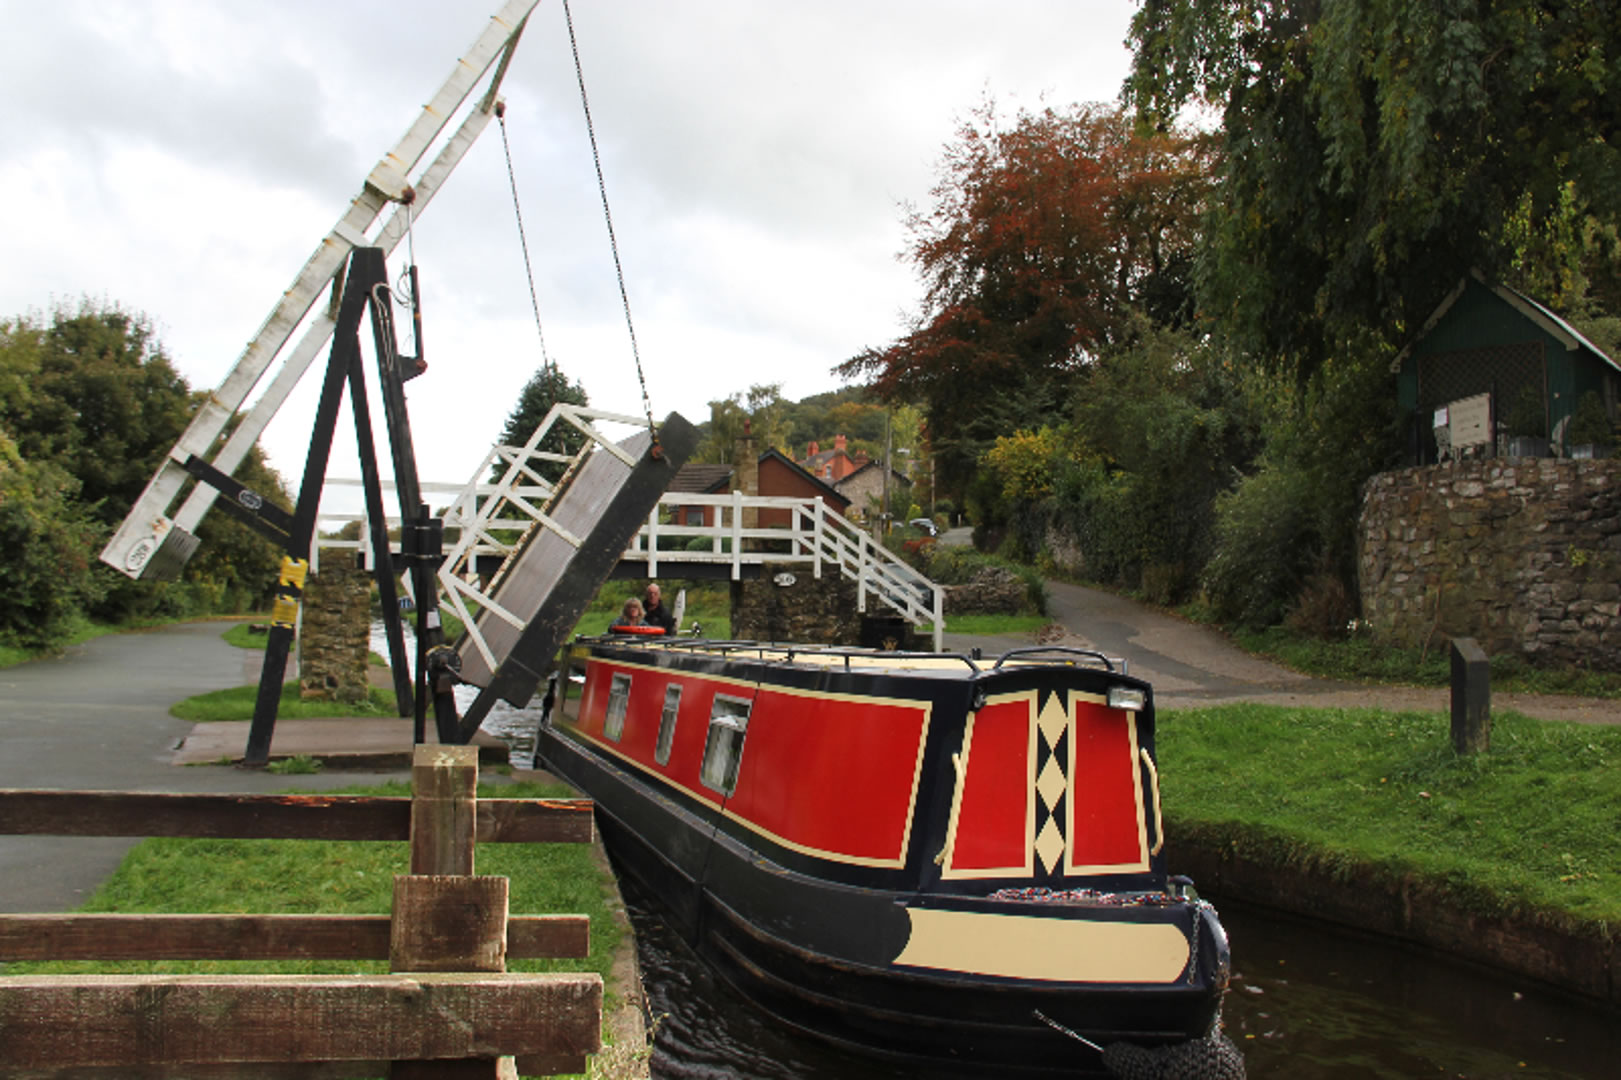 The Lady Sophia canal boat operating out of Middlewich